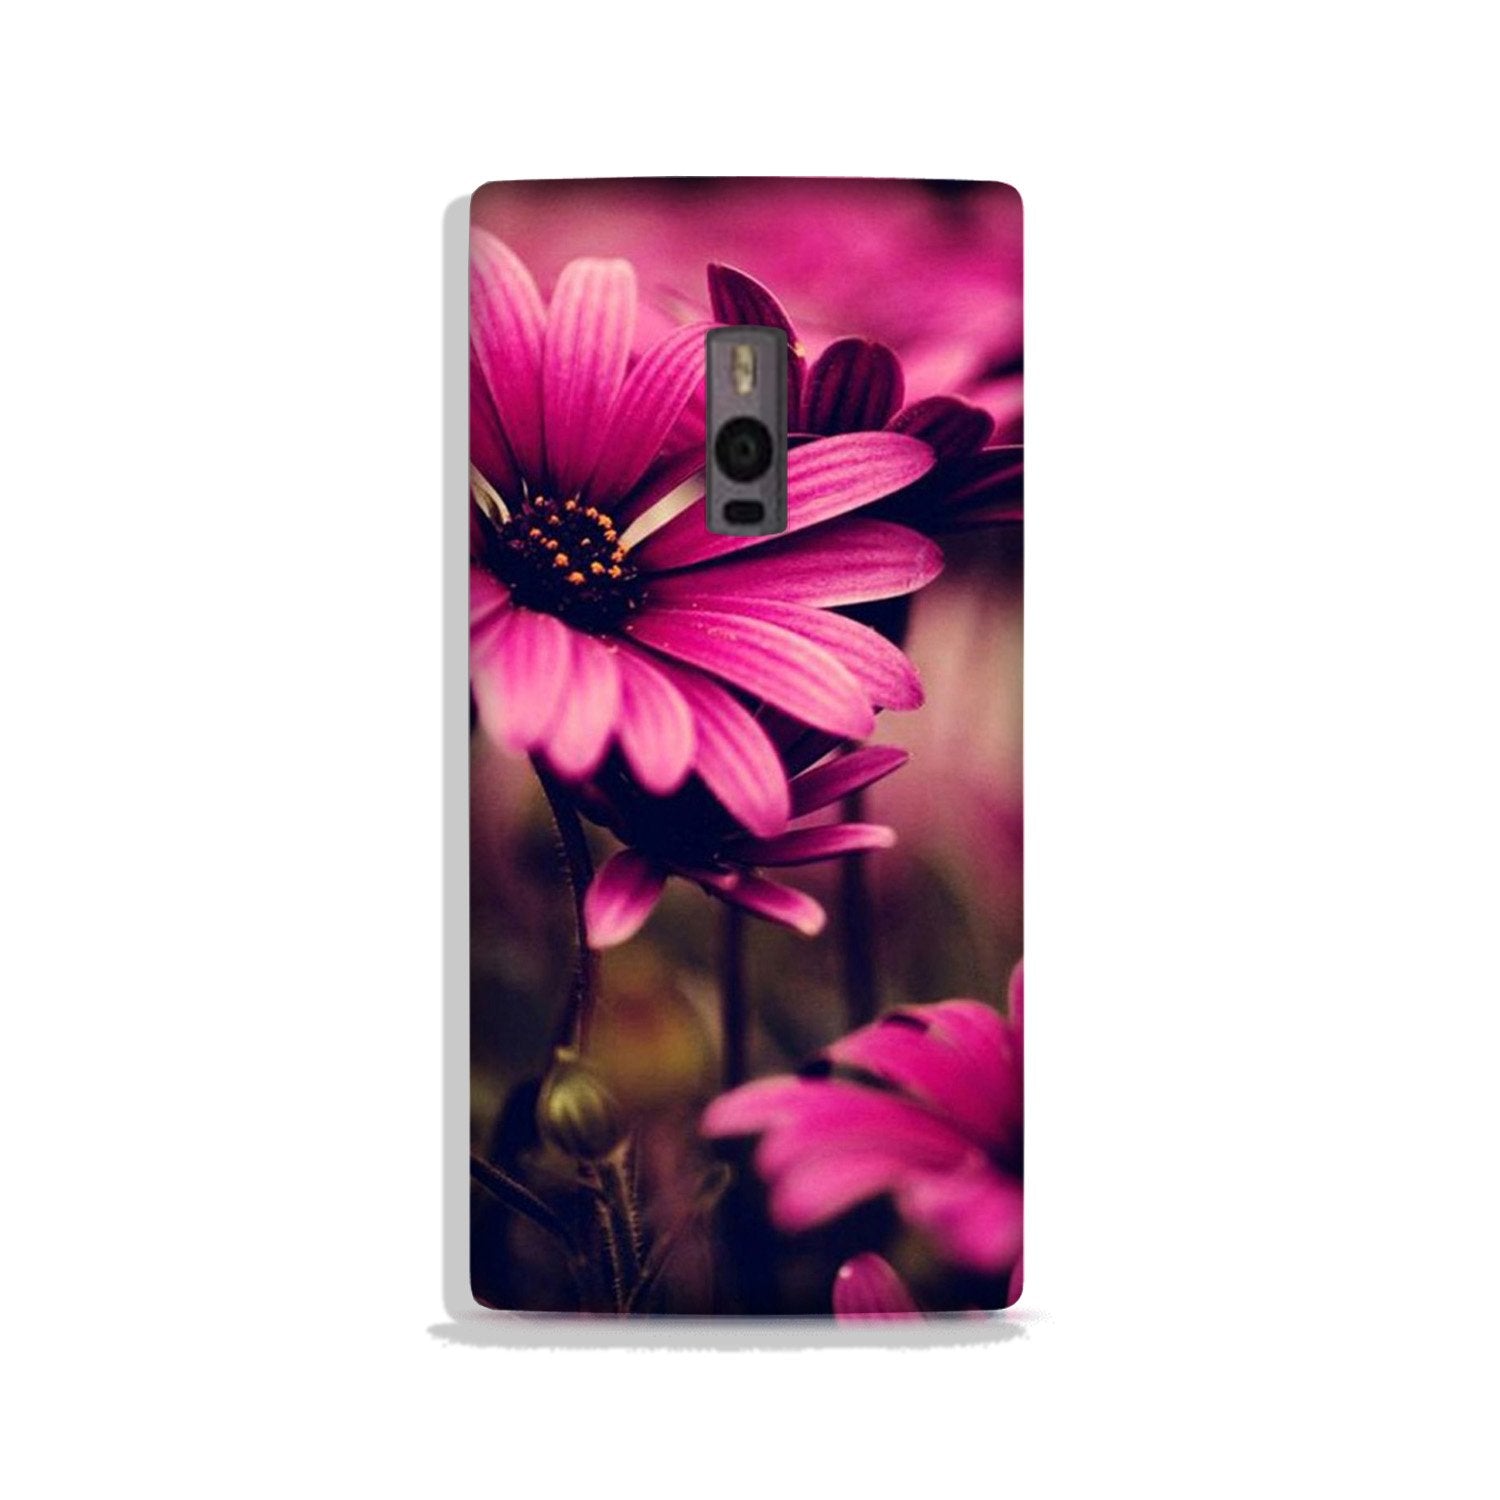 Purple Daisy Case for OnePlus 2